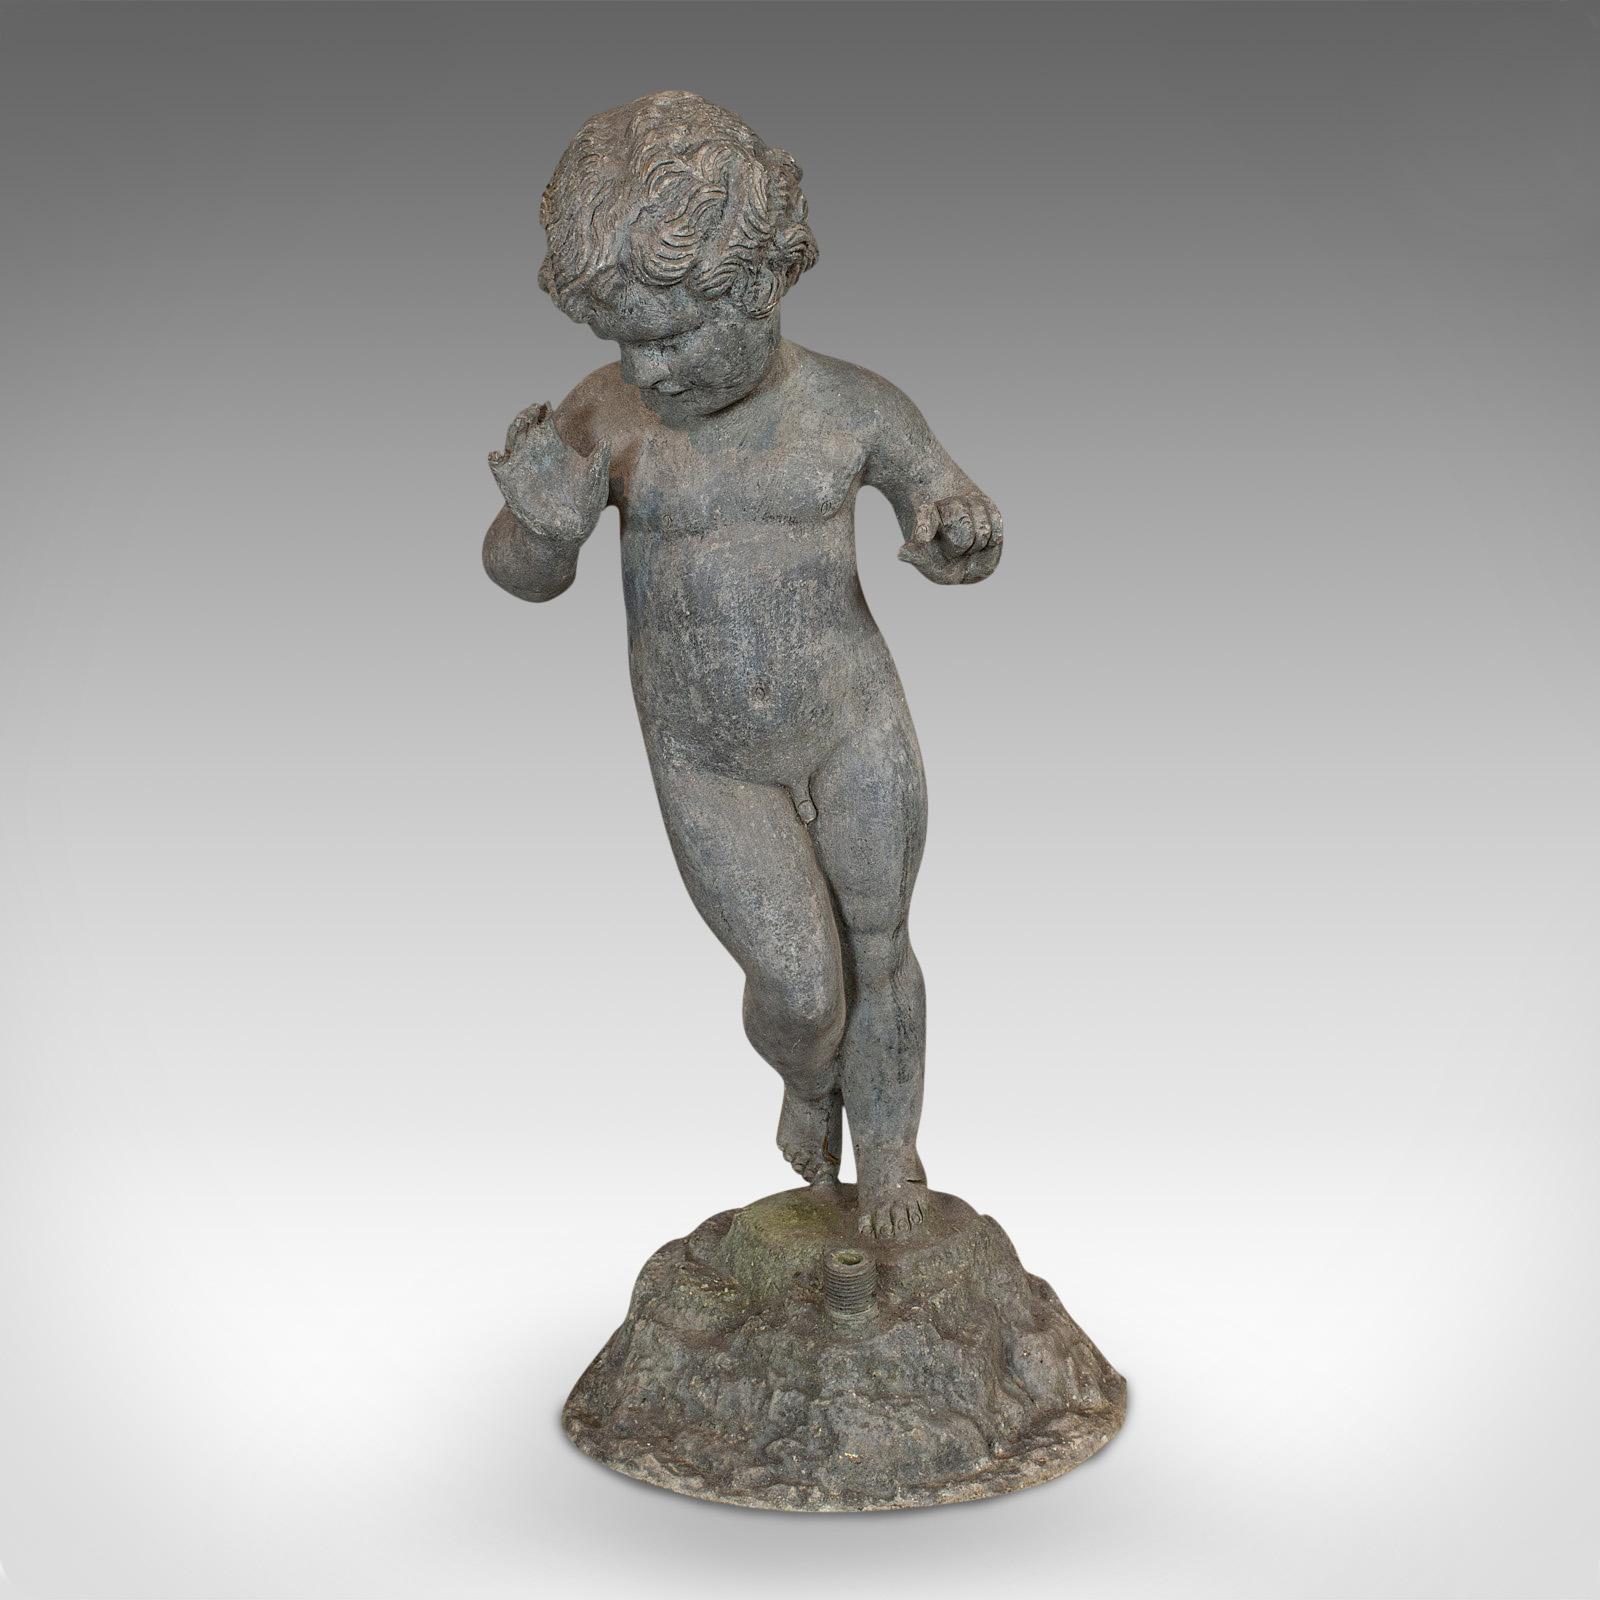 This is an antique cherub. An English, lead putto statue, ideal for an ornamental garden, dating to the late Victorian period, circa 1900.

A wonderfully substantial statue
Displays a desirable aged patina
Cast in lead, with skilled, fine